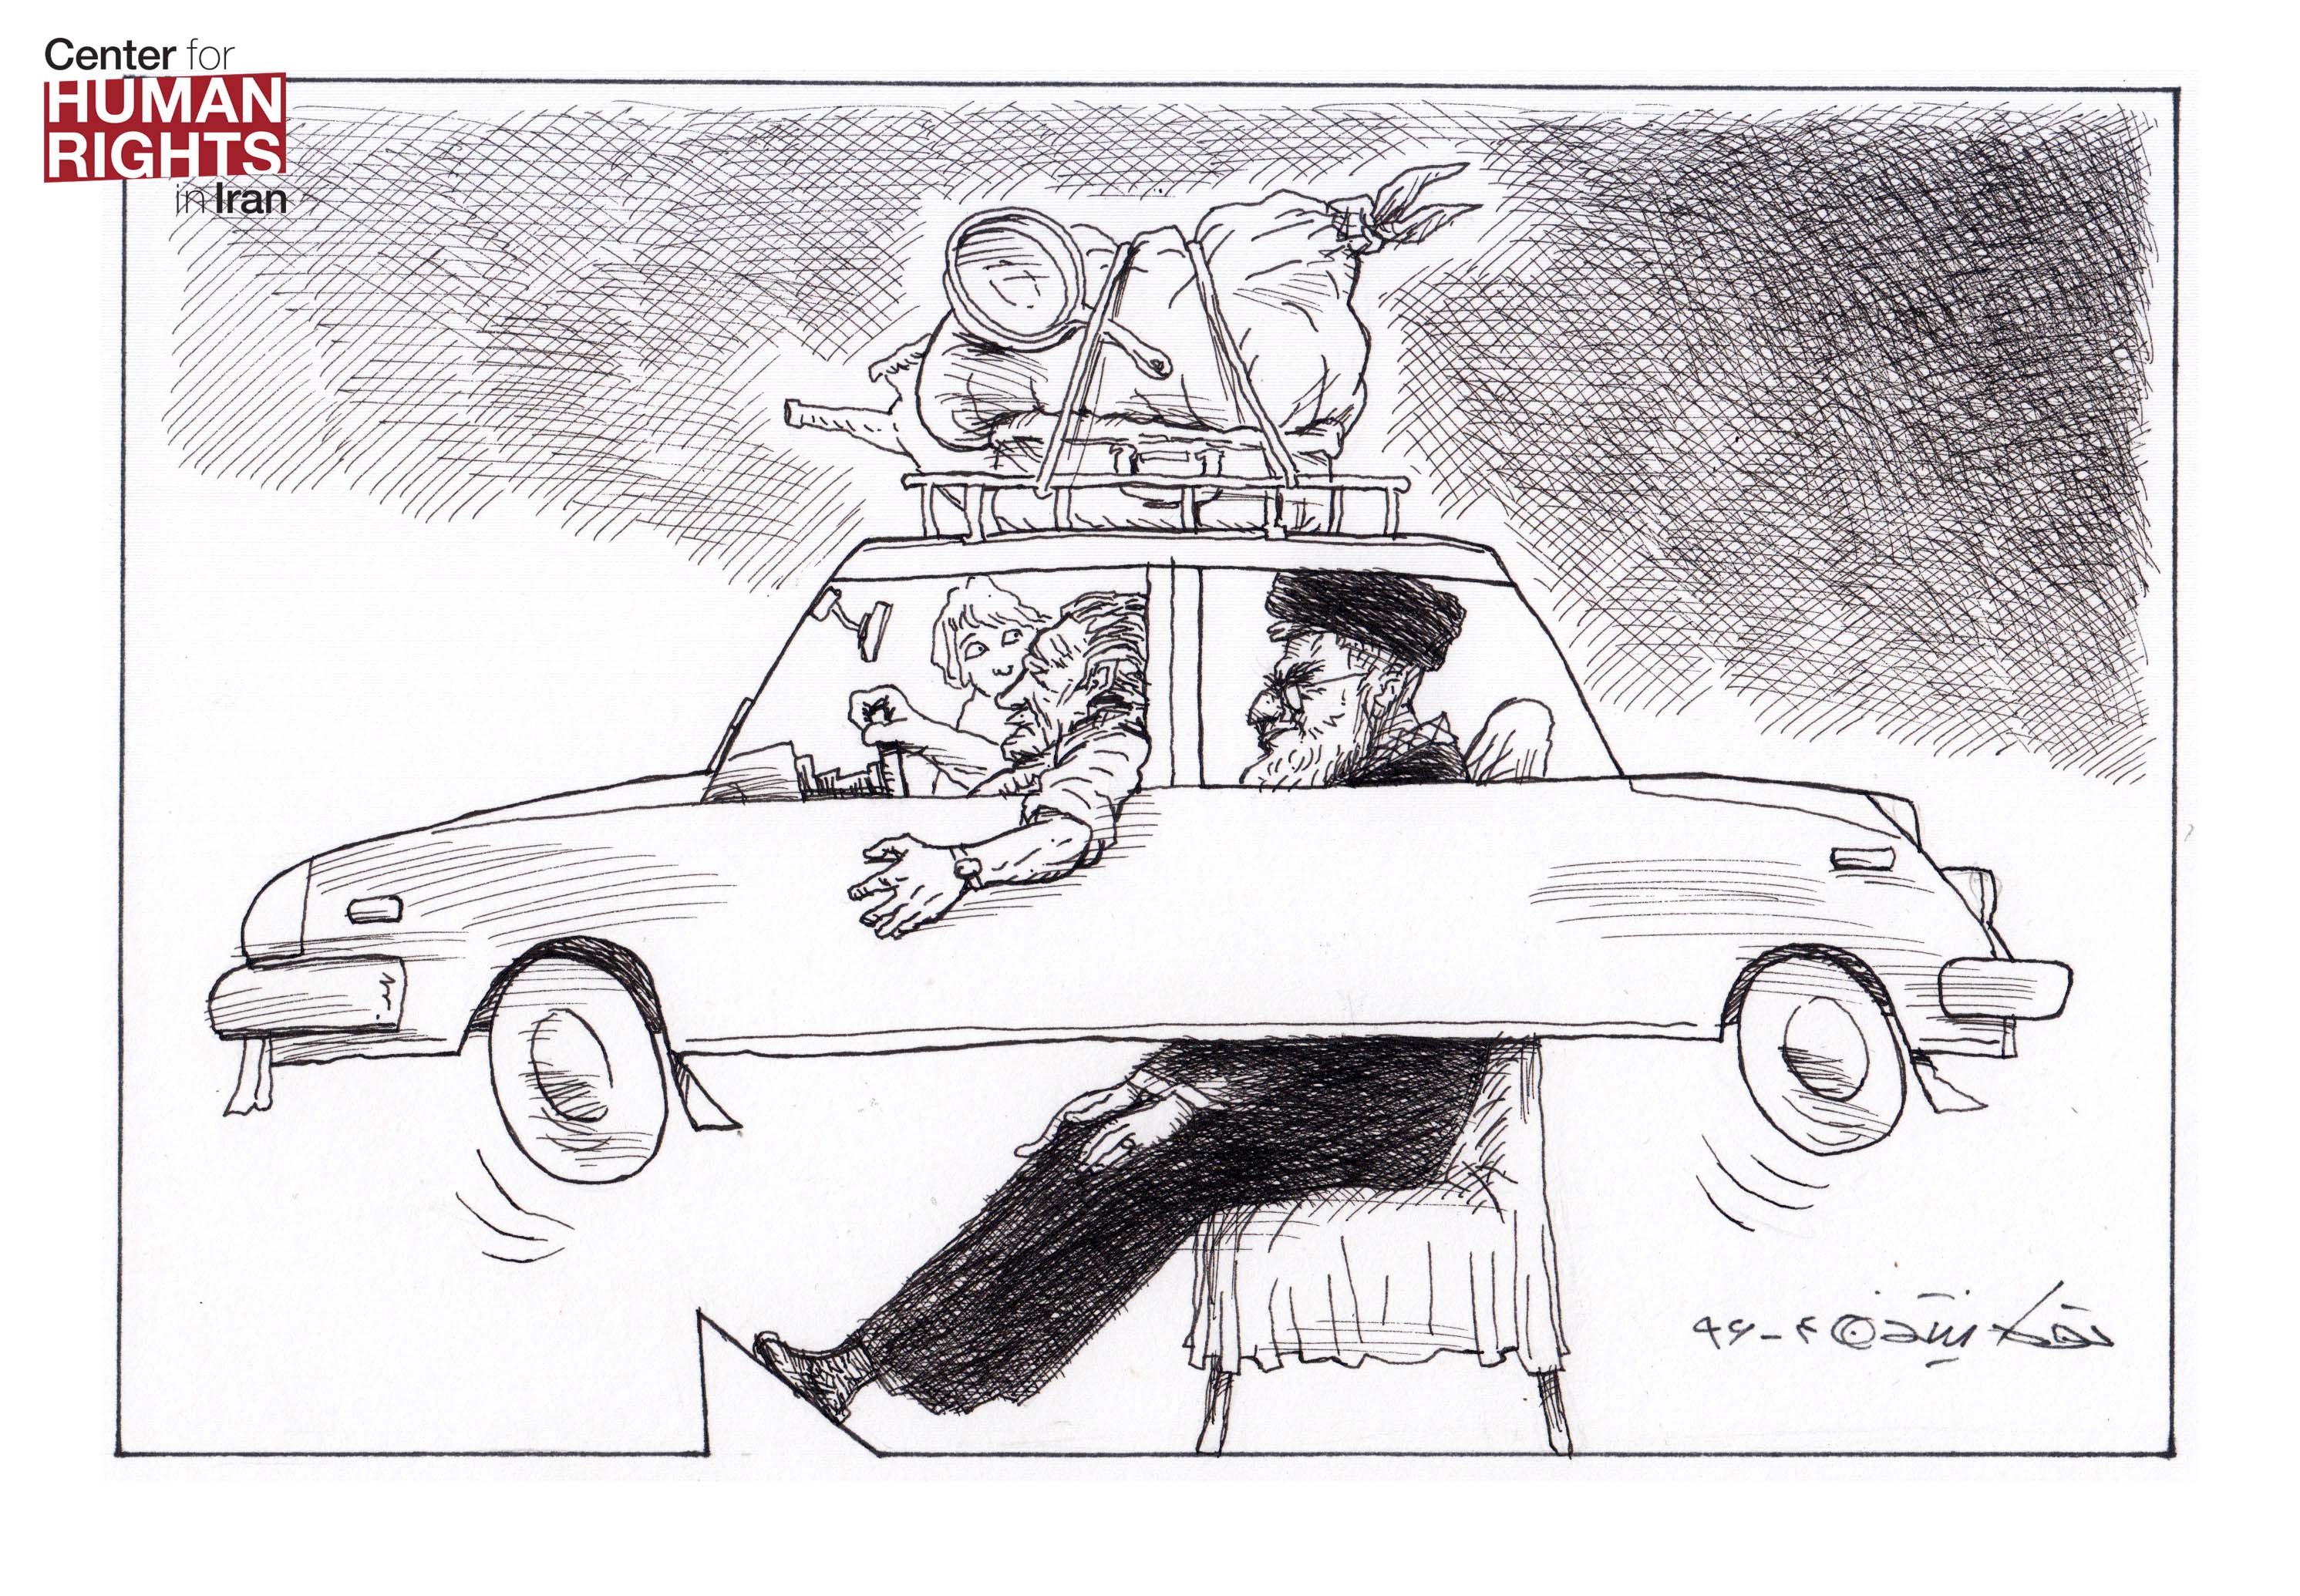 Cartoonist Touka Neyastani depicts the debate over whether women should be forced to wear hijabs in cars, which legal experts argue are private spaces and therefore not subject to Iran's mandatory hijab law. http://www.iranhumanrights.org/2017/07/contradictory-laws-exasperate-debate-over-iranian-womens-observance-of-hijab-in-cars/